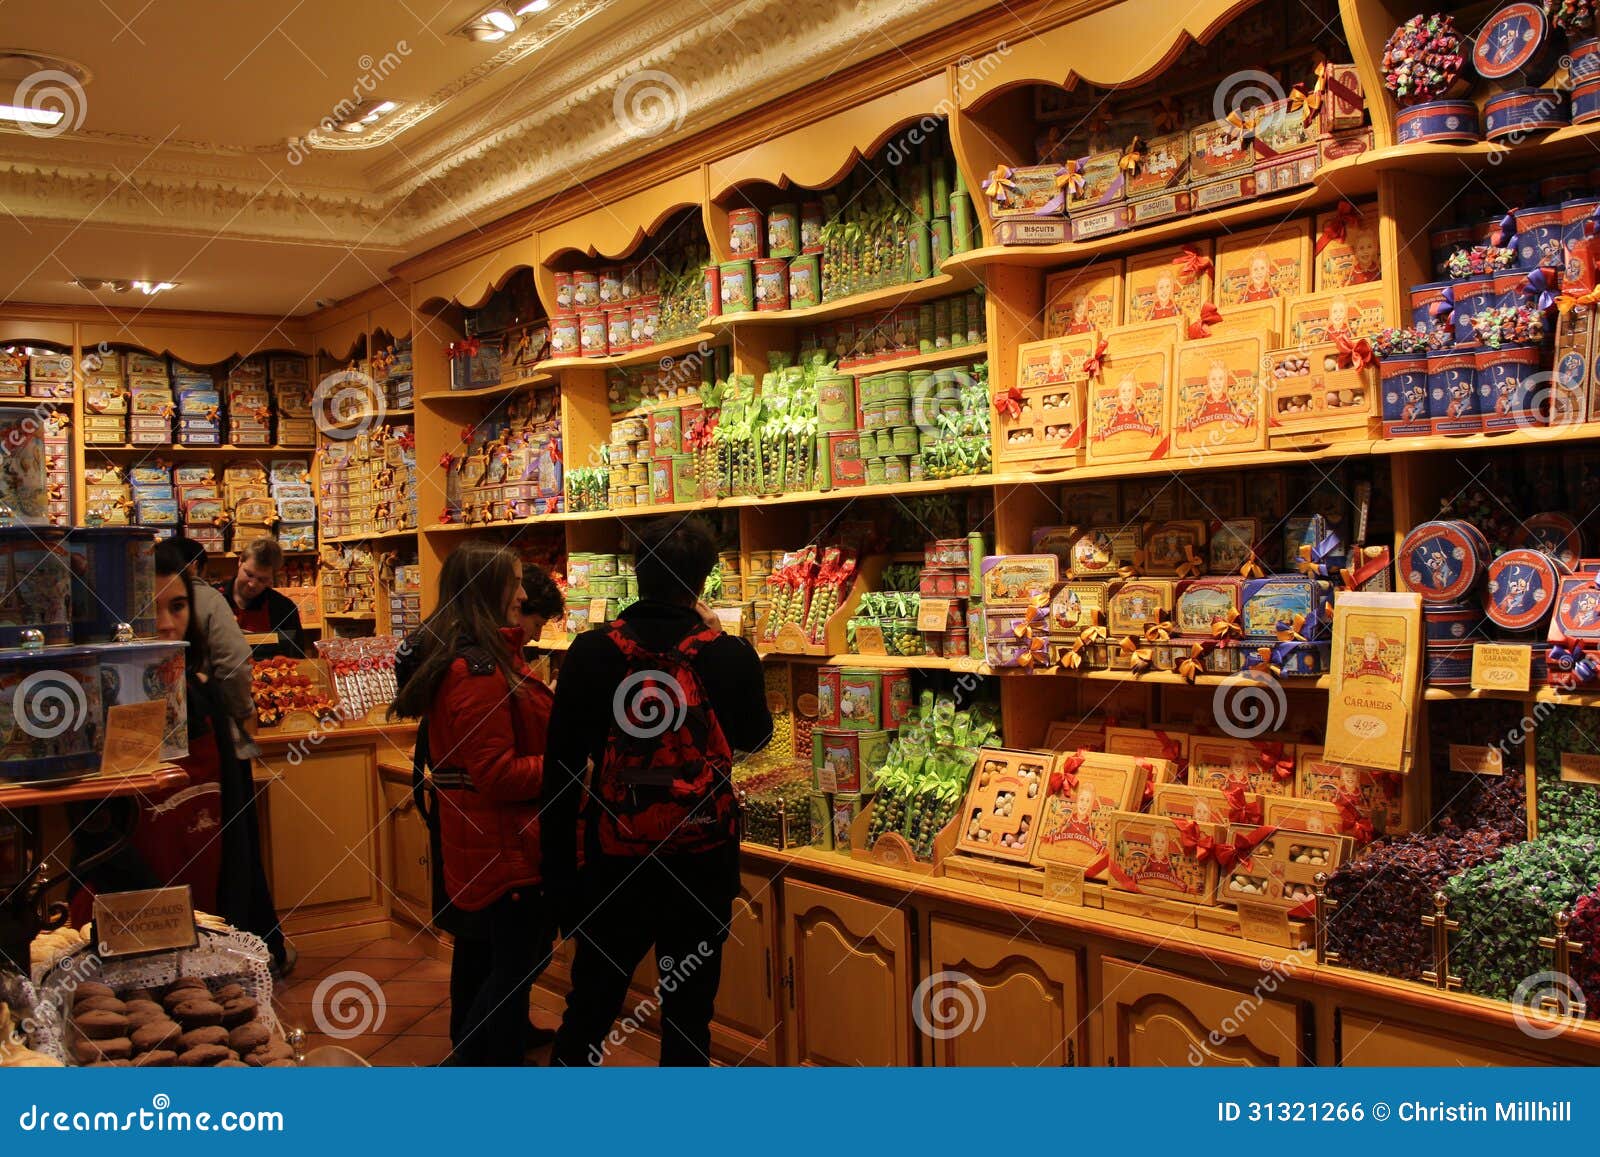 Candy shop editorial photo. Image of background, flavor - 31321266